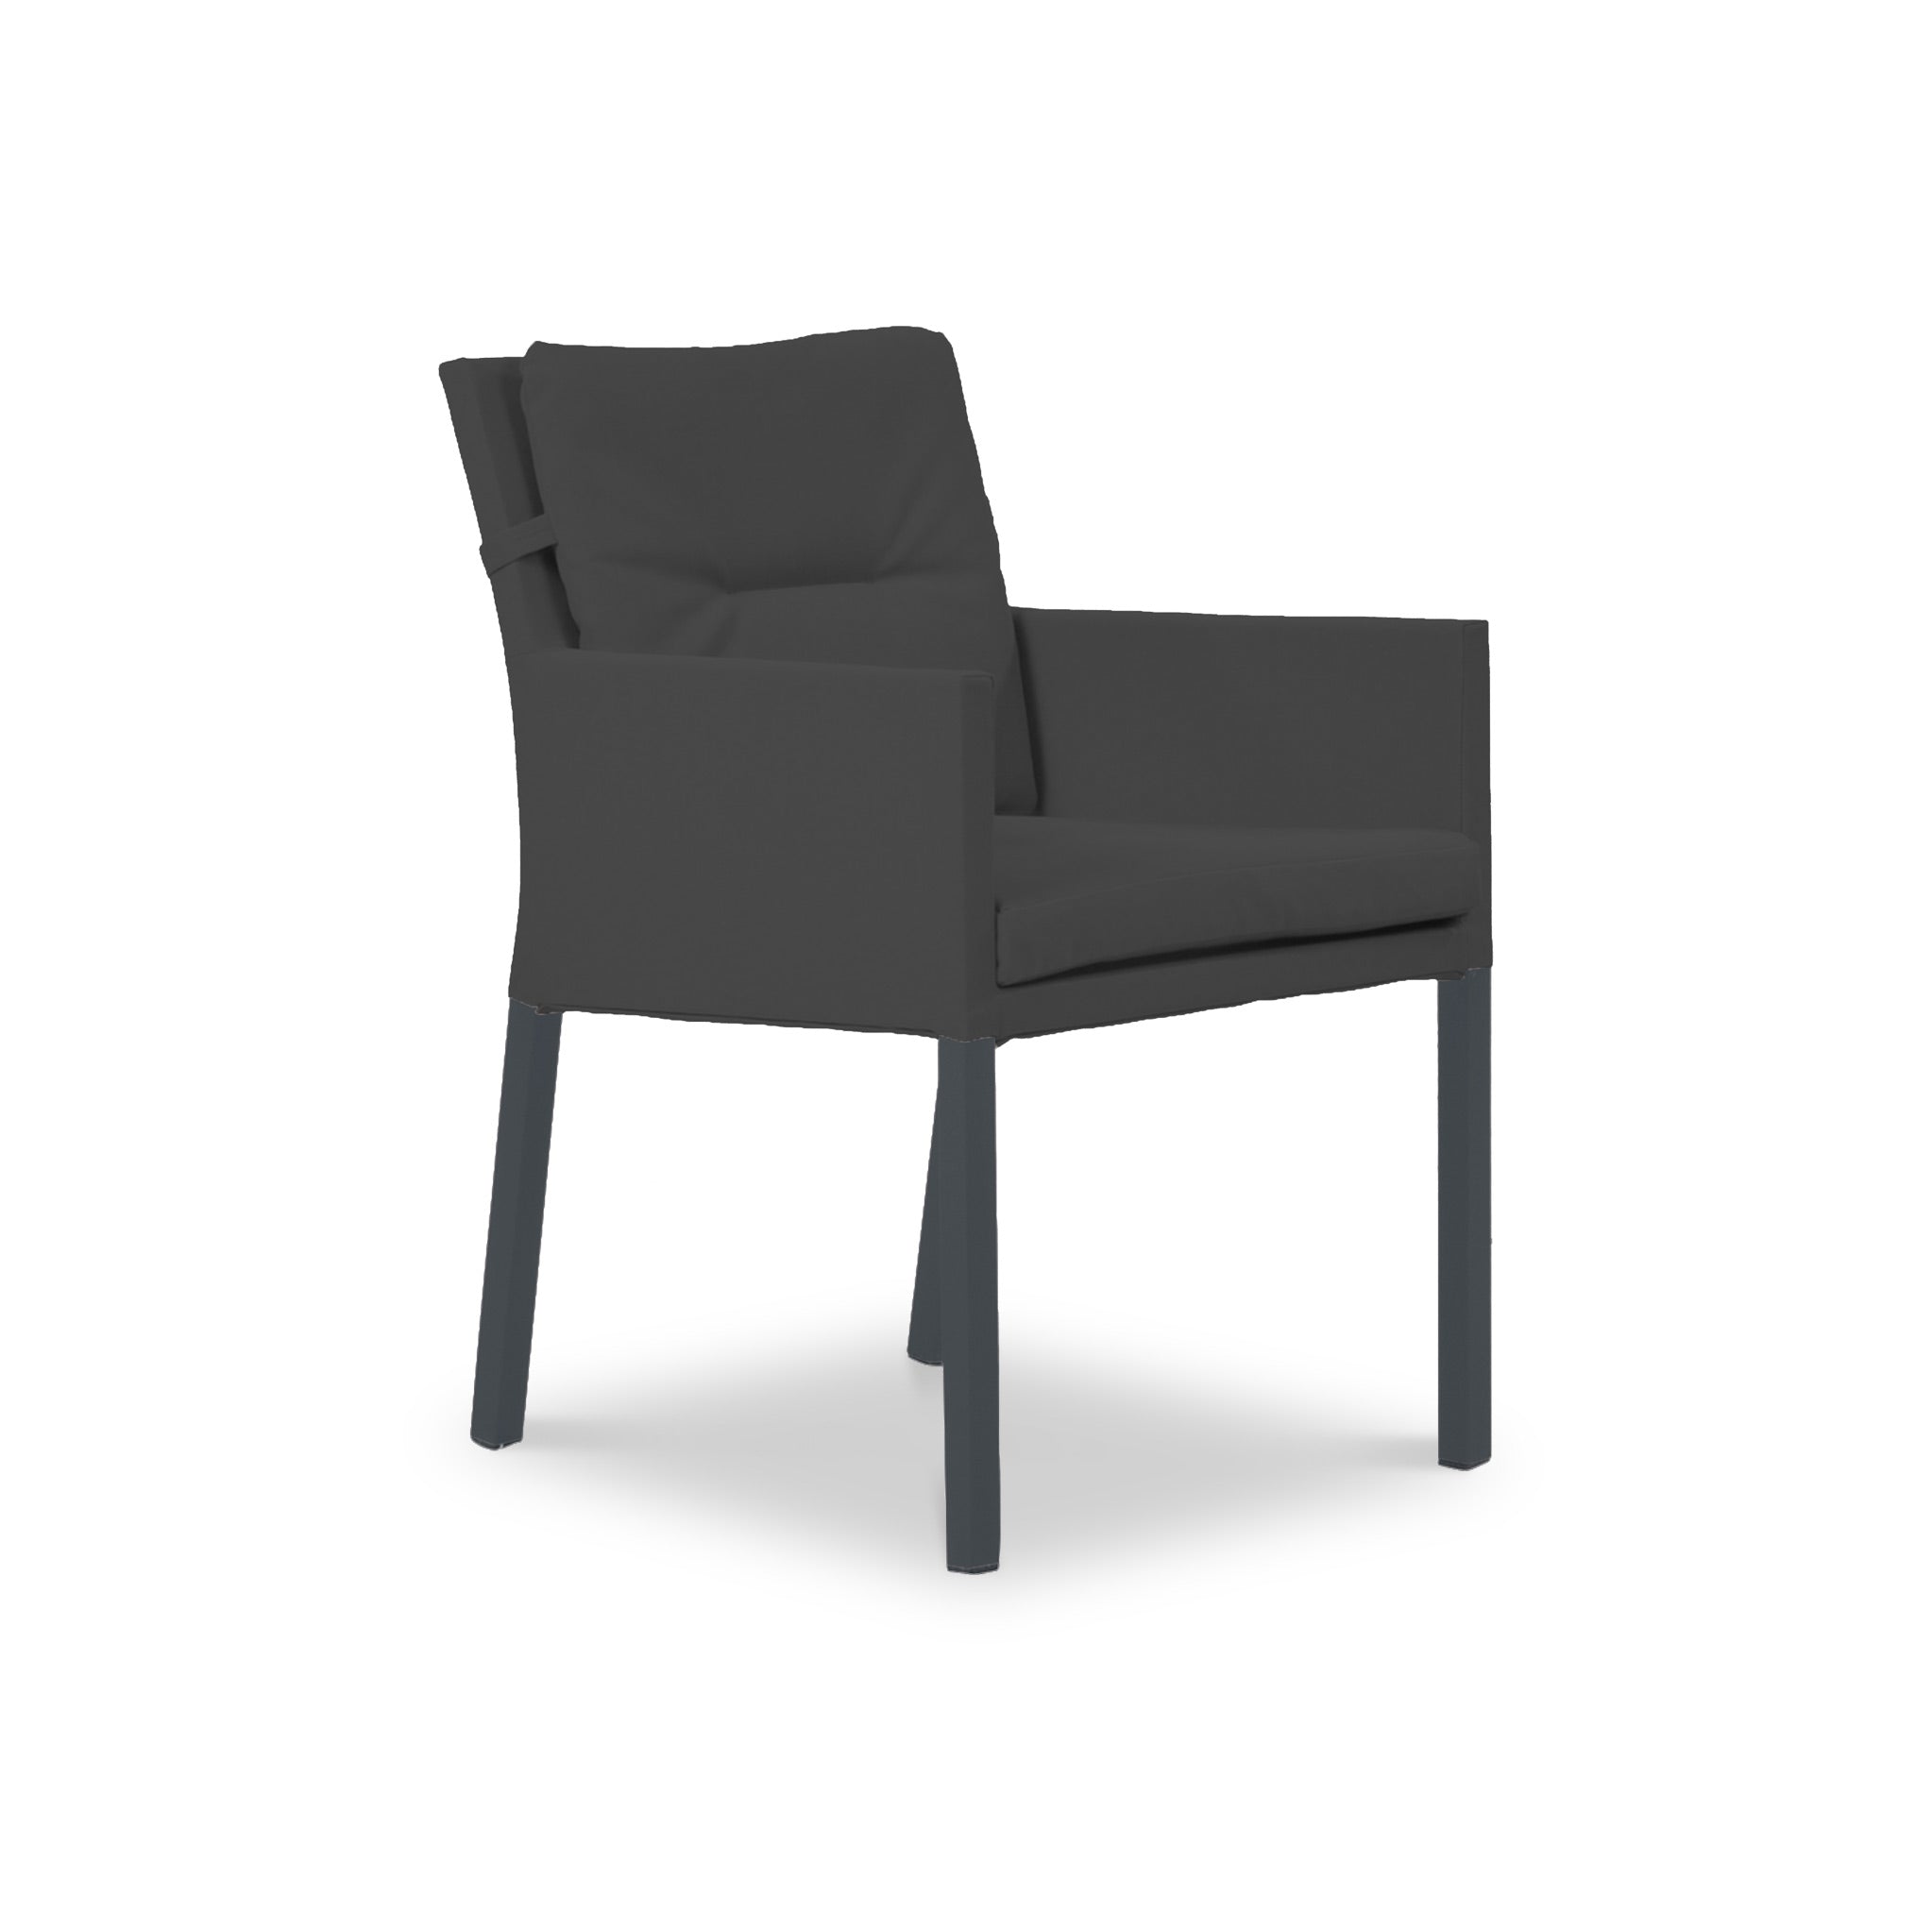 Life Caribbean Outdoor Dining Chair Roseland